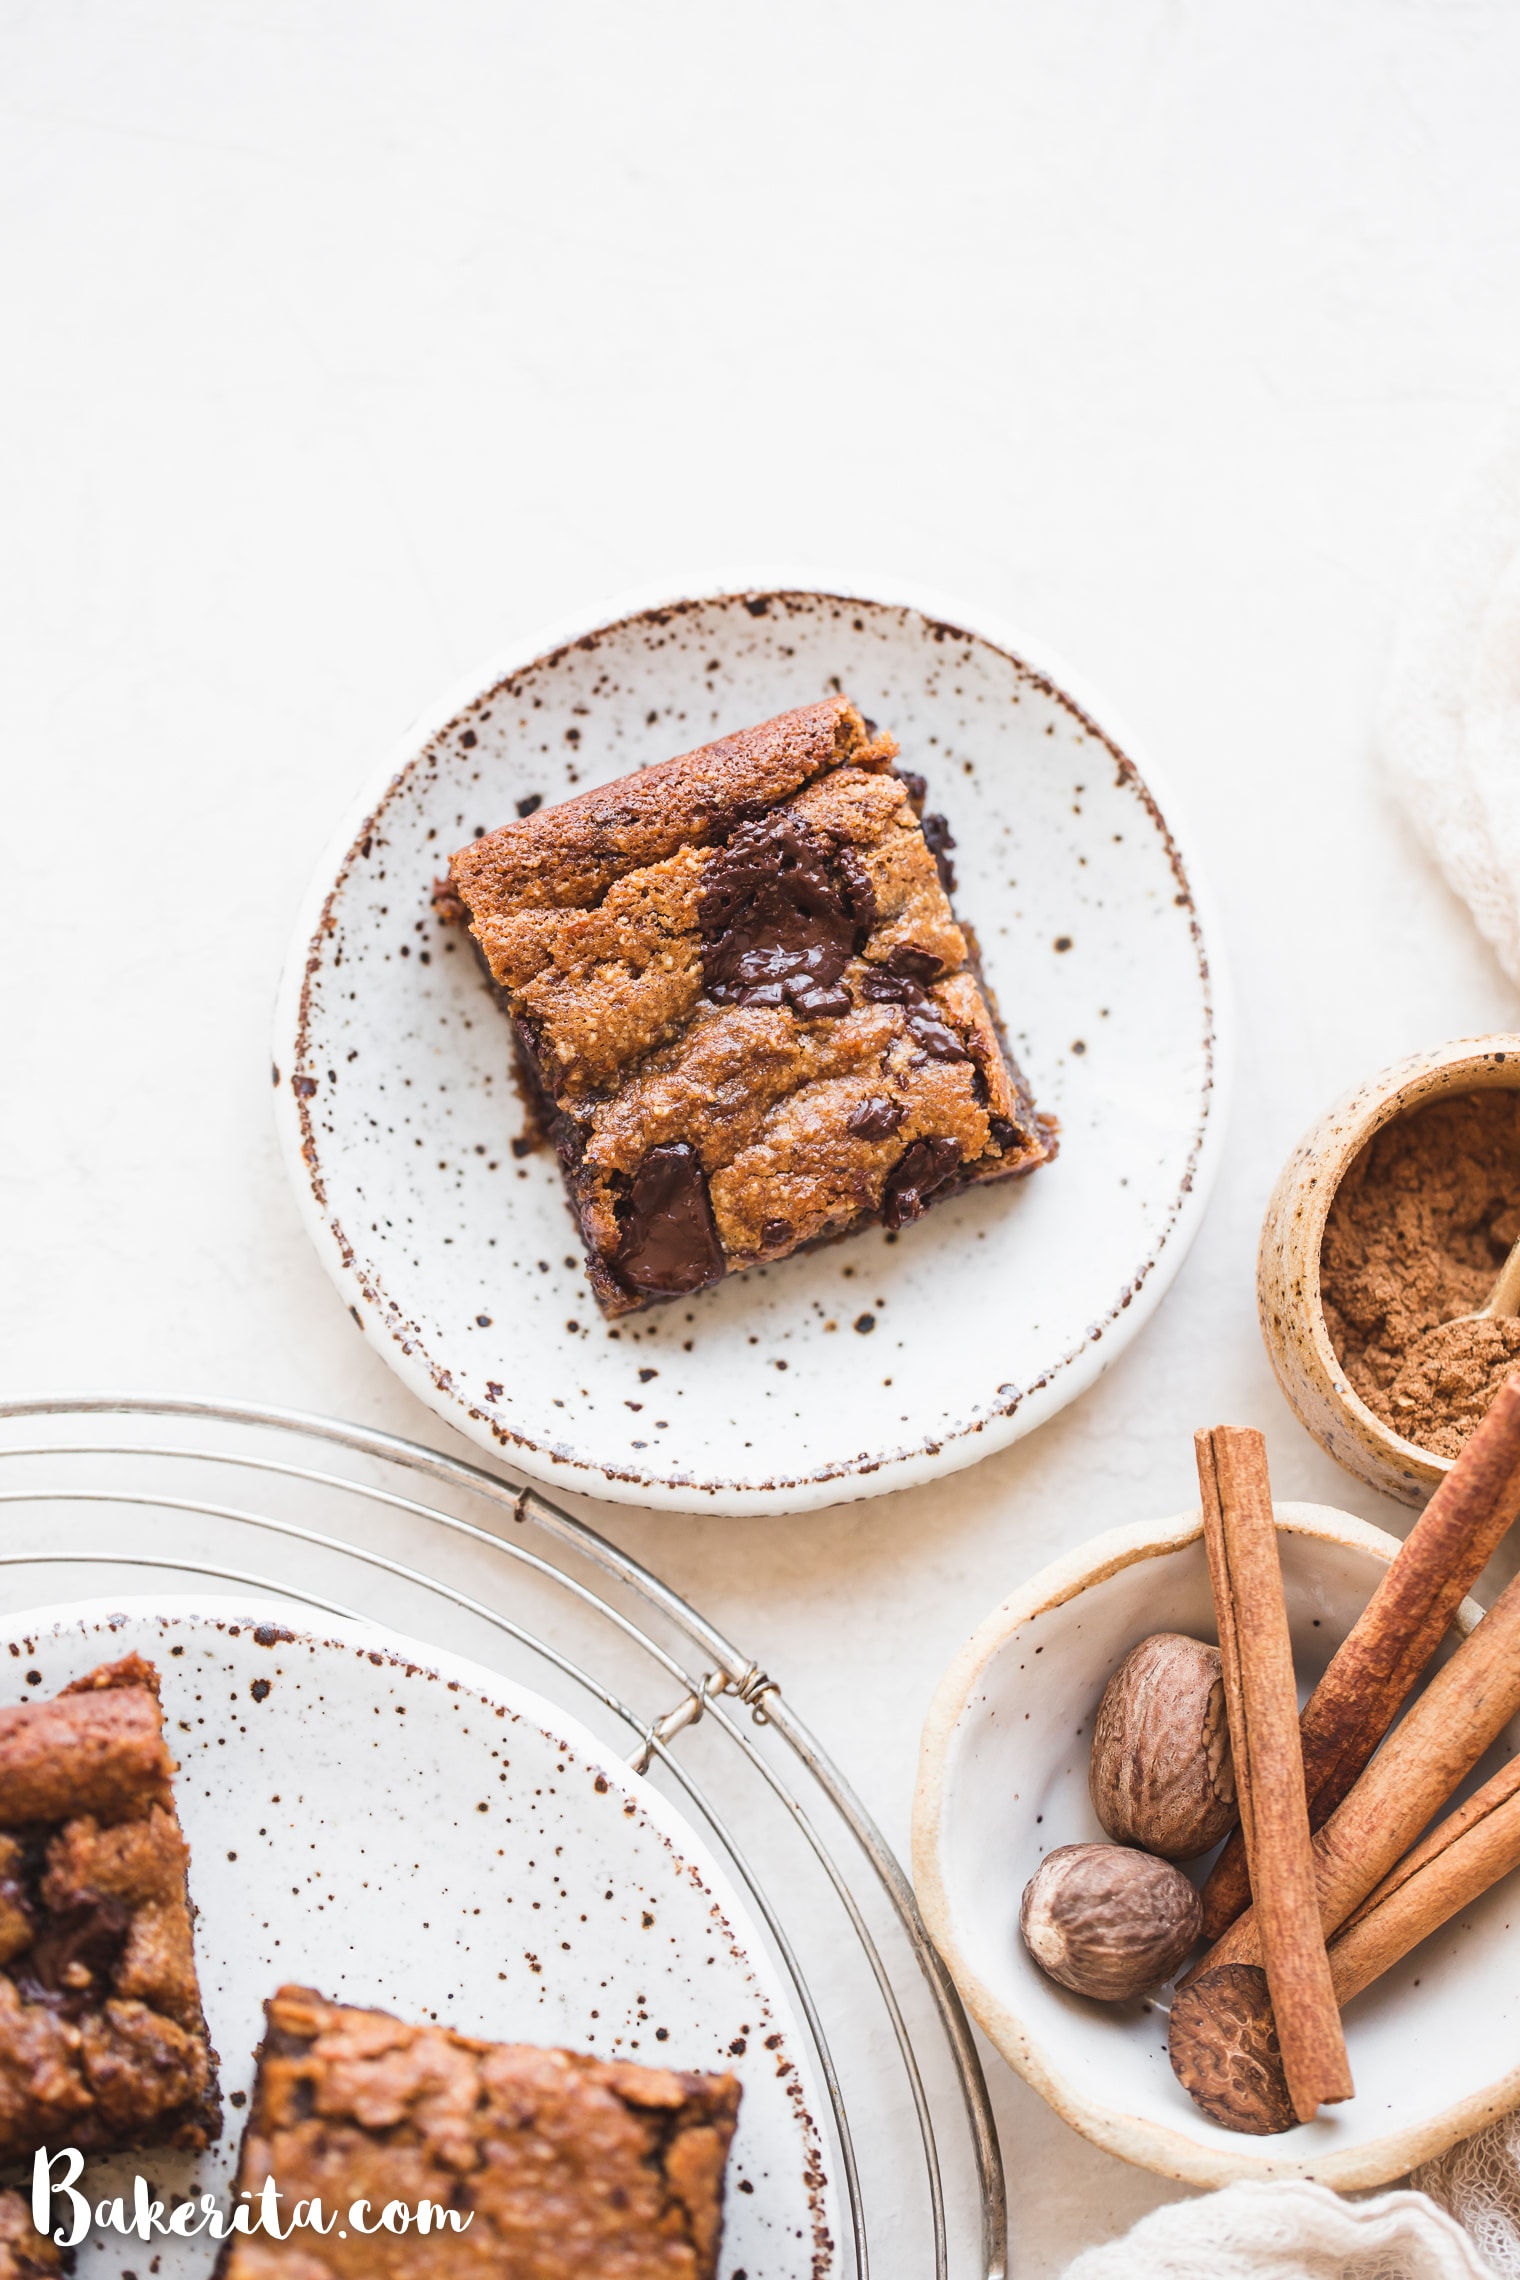 These Gluten-Free Vegan Sweet Potato Blondies taste like fall in a bar cookie! With warm spices and dark chocolate chunks, these decadent blondies will satisfy your fall dessert cravings.